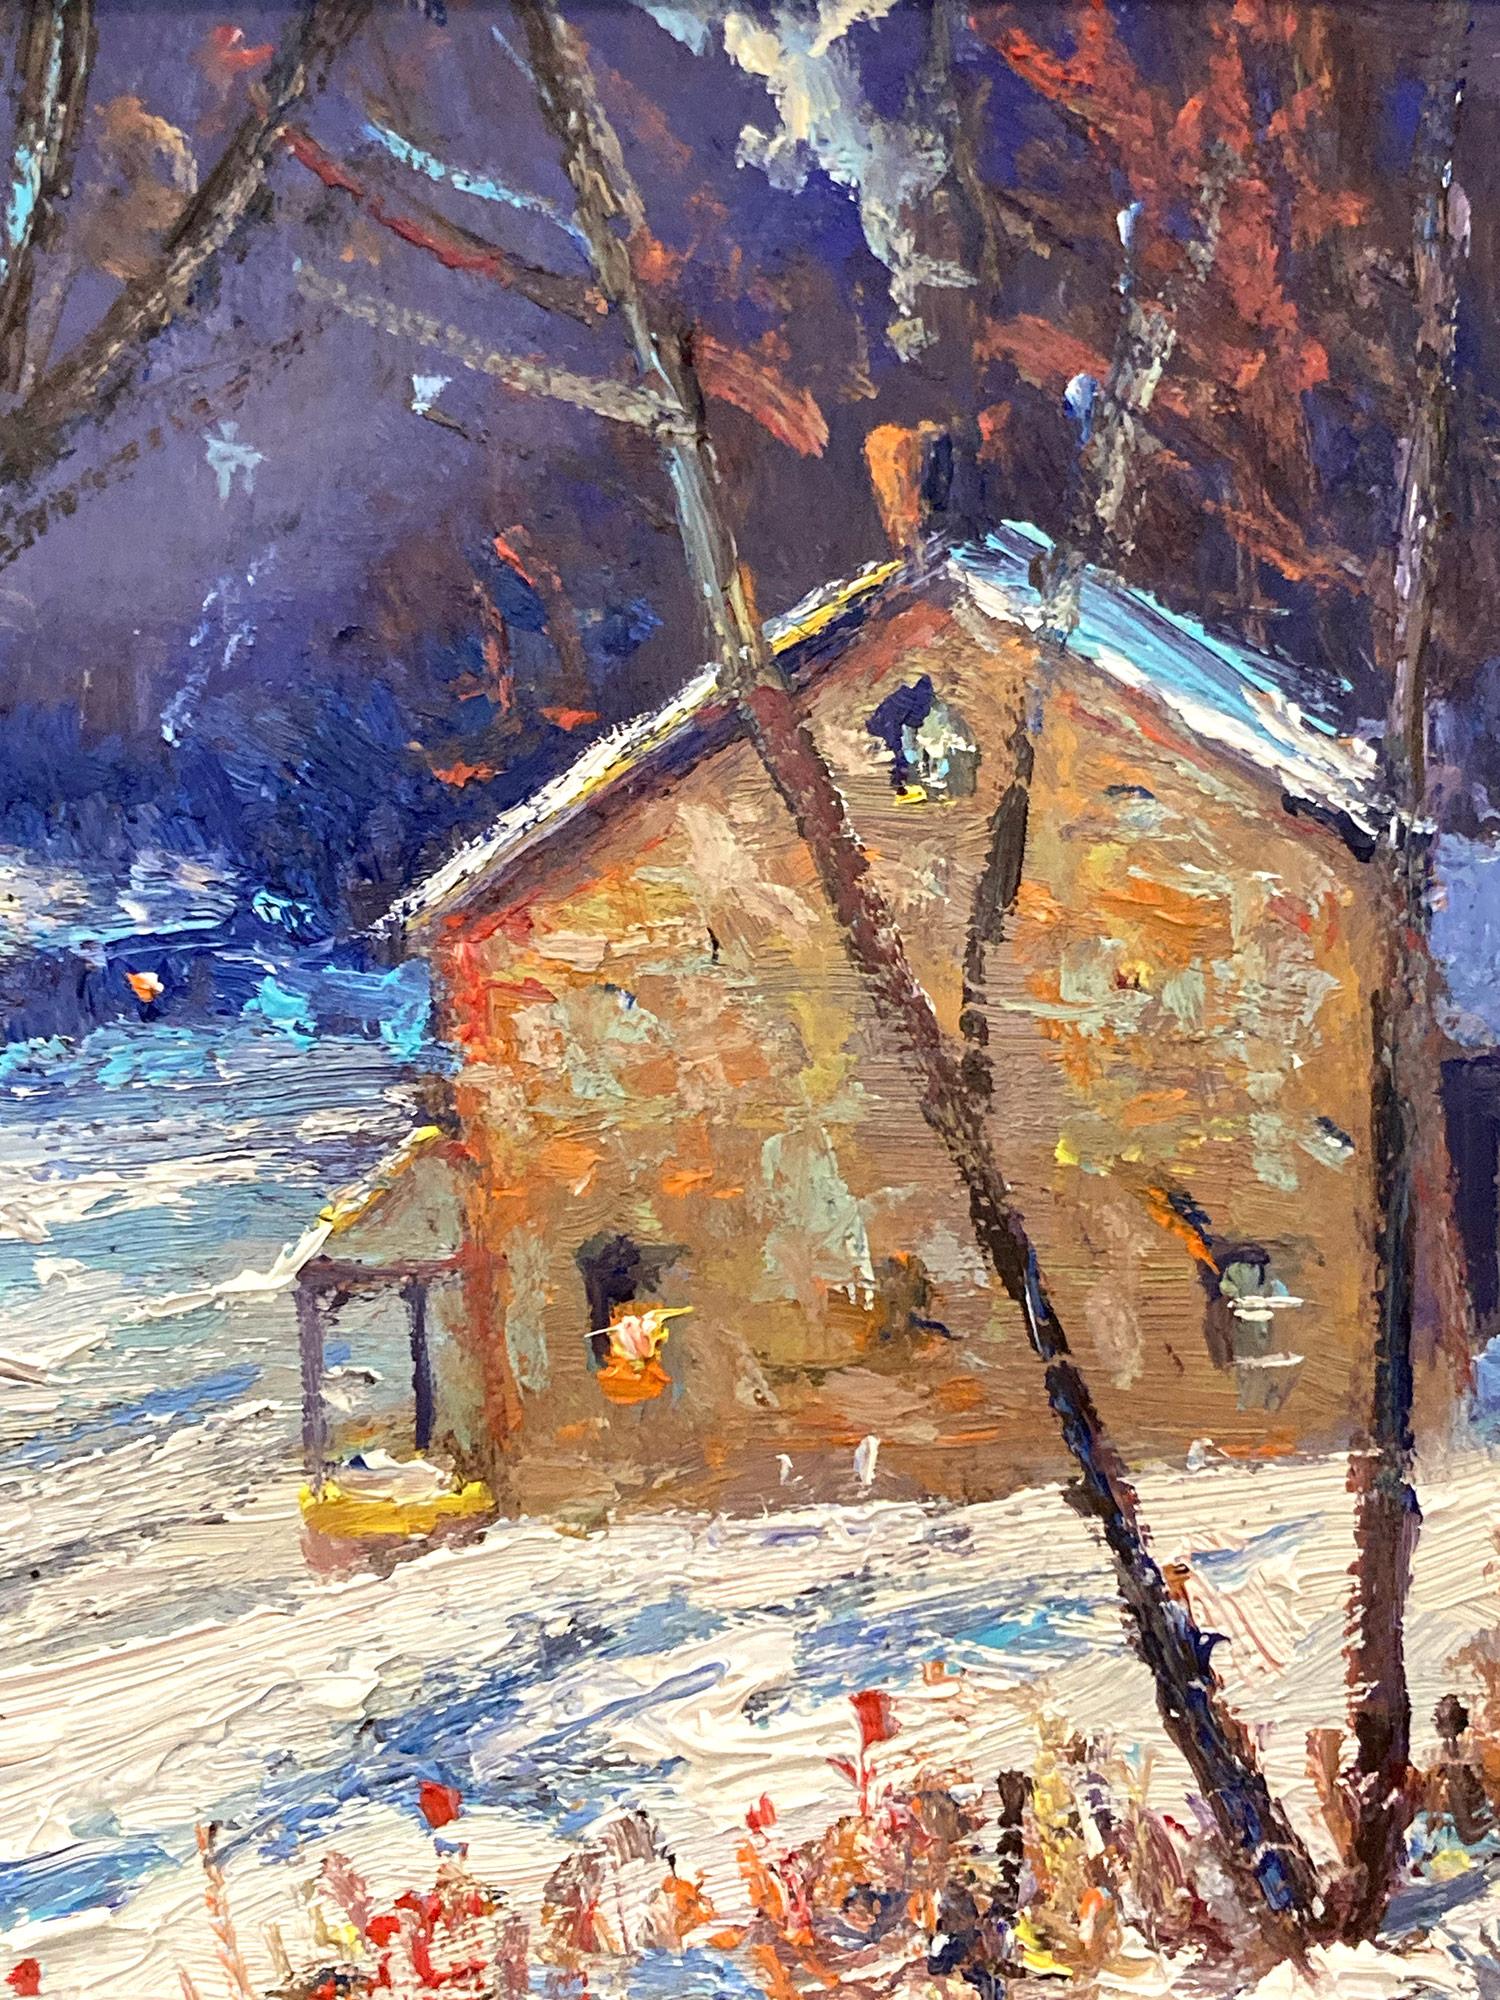 Impressionist winter pastoral scene of a quaint snow covered home by Buckingham, PA. Willett has portrayed this charming scene in a most intimate, yet energetic way, and has packed much feeling into this miniature work. It is almost as if we are